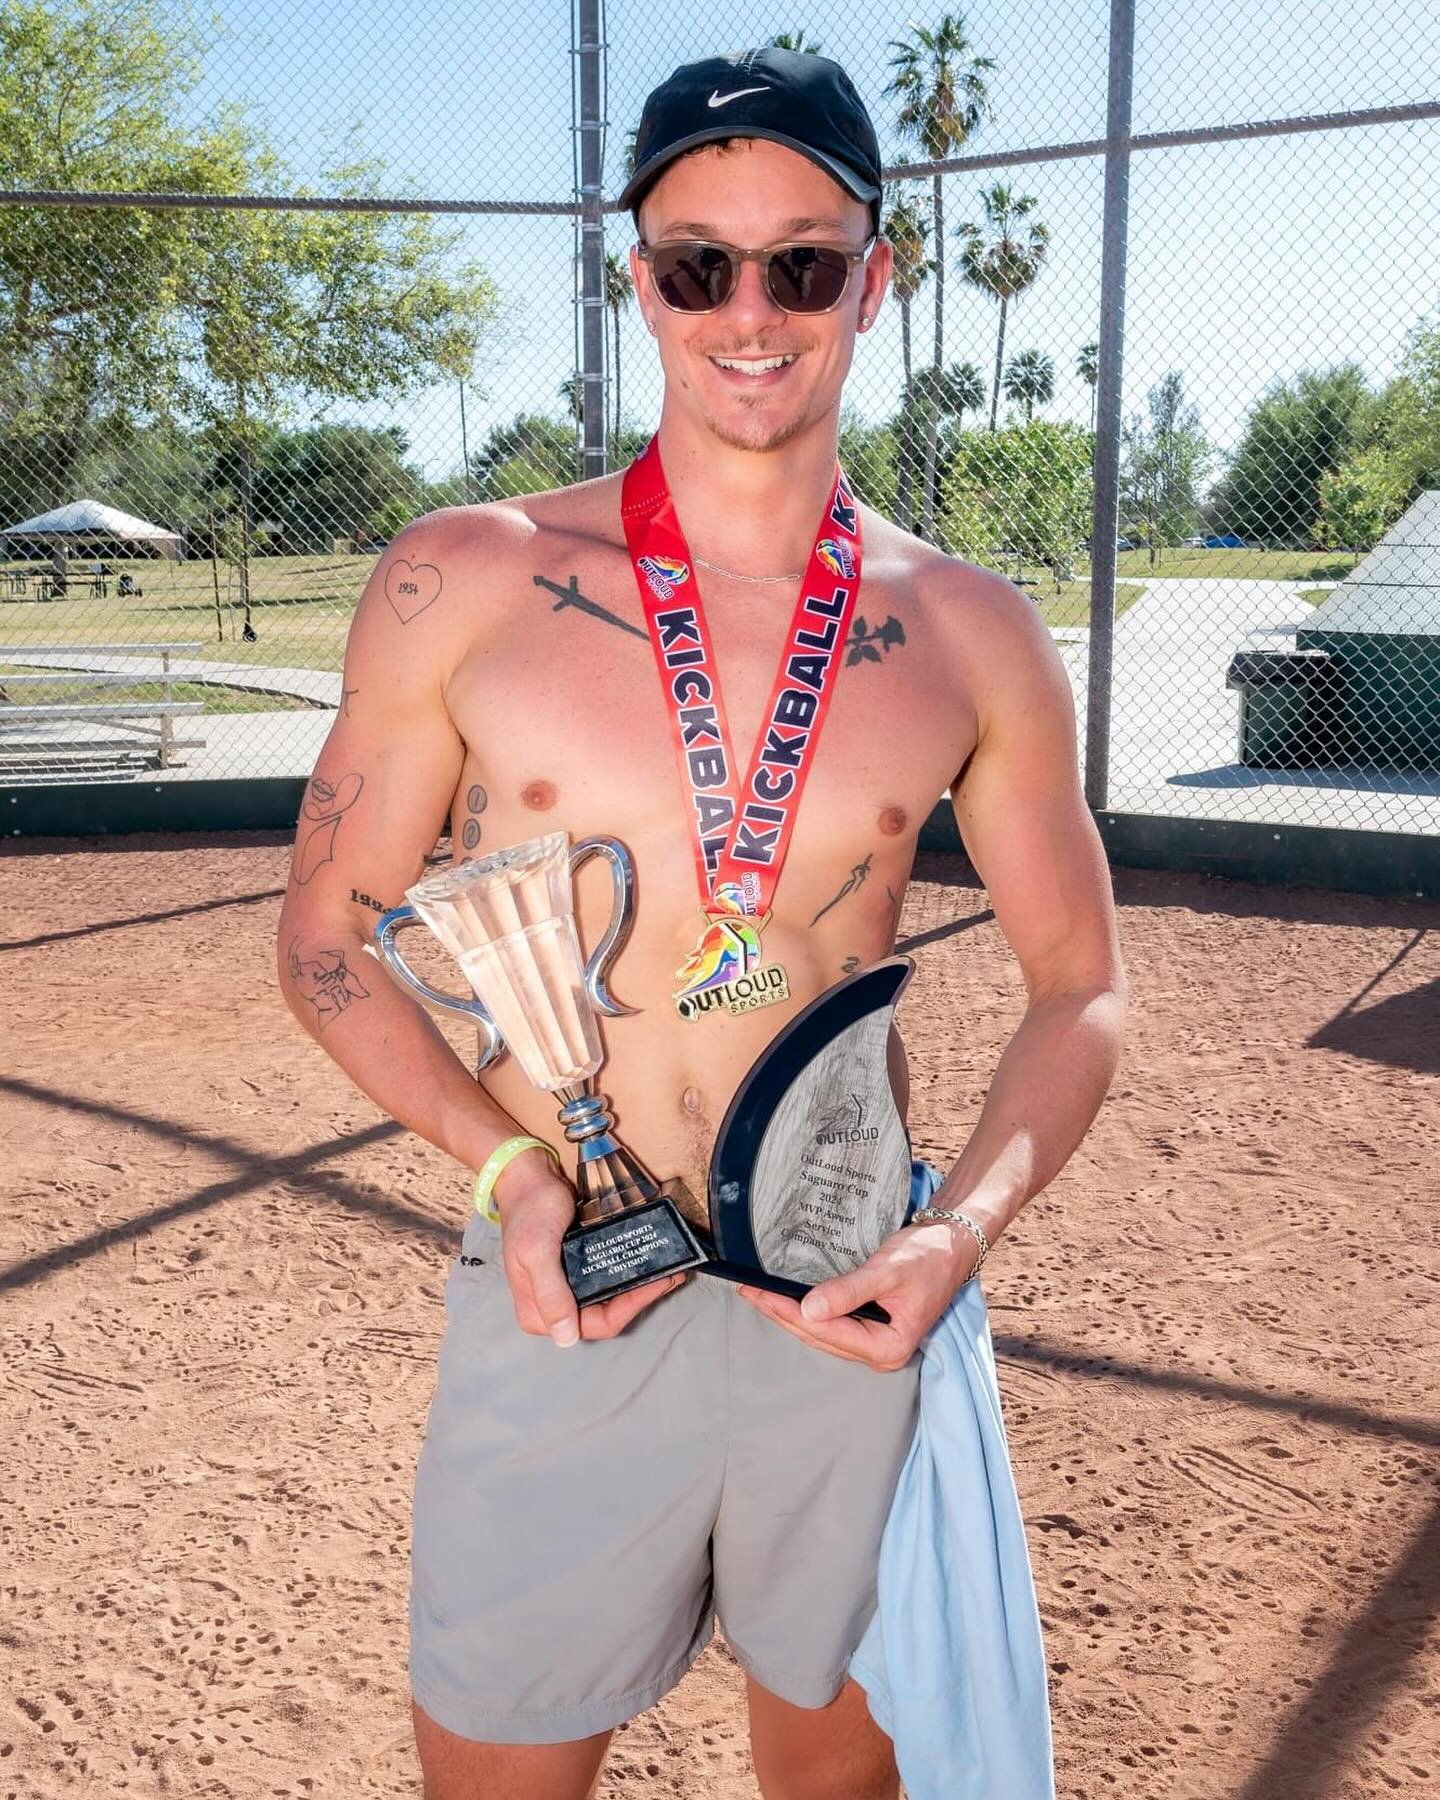 What it feels like to be a champion!! All first time winners at are Saguaro Cup tournament! Wanna be a champion? Join us for the OutLoud Sports Festival Labor Day weekend! Big announcements coming soon!! Check out more photos at https://www.facebook.